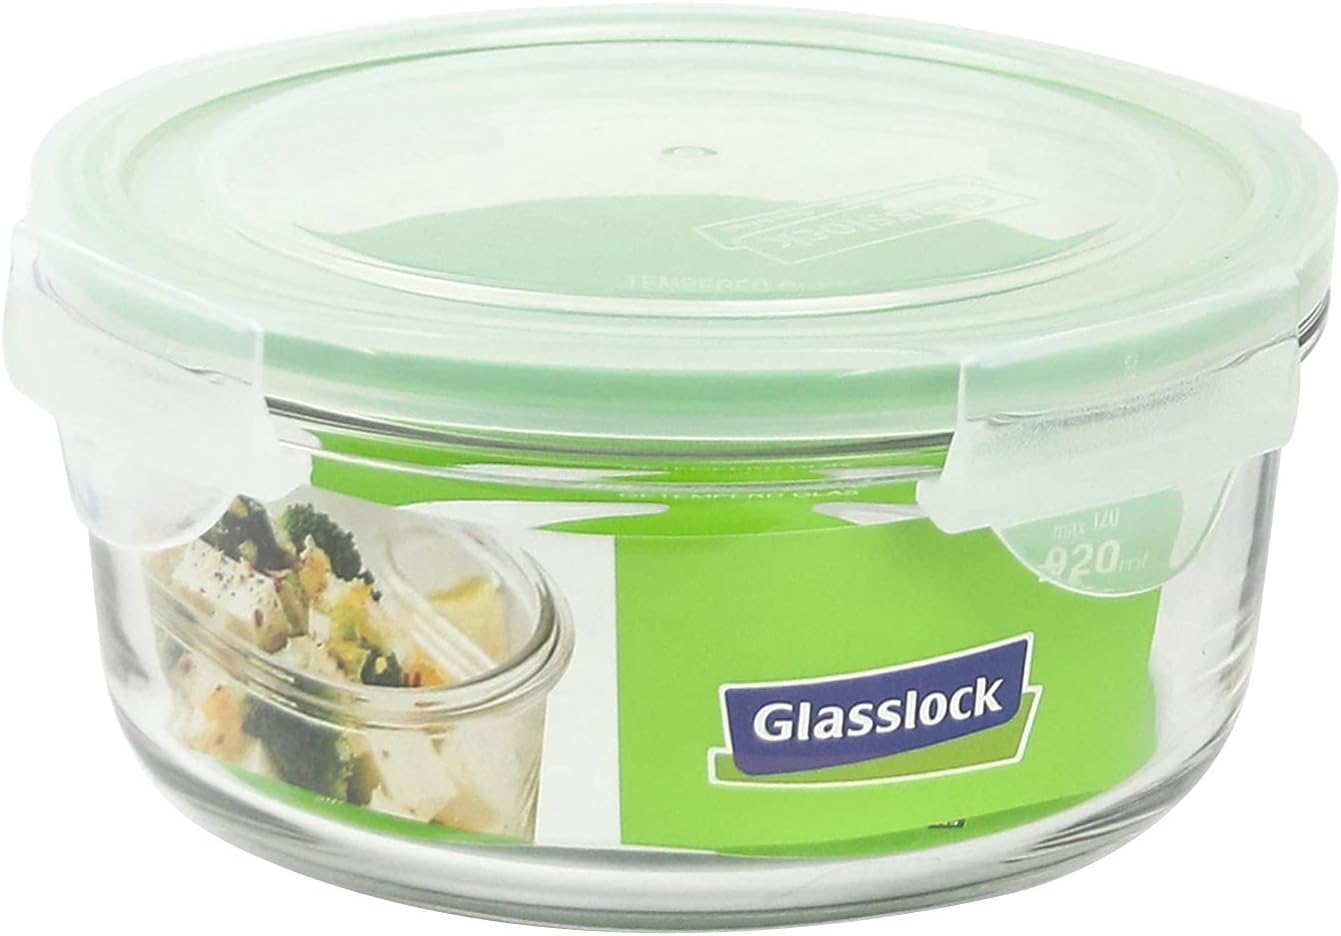 Glasslock Round Container, 12-Ounce